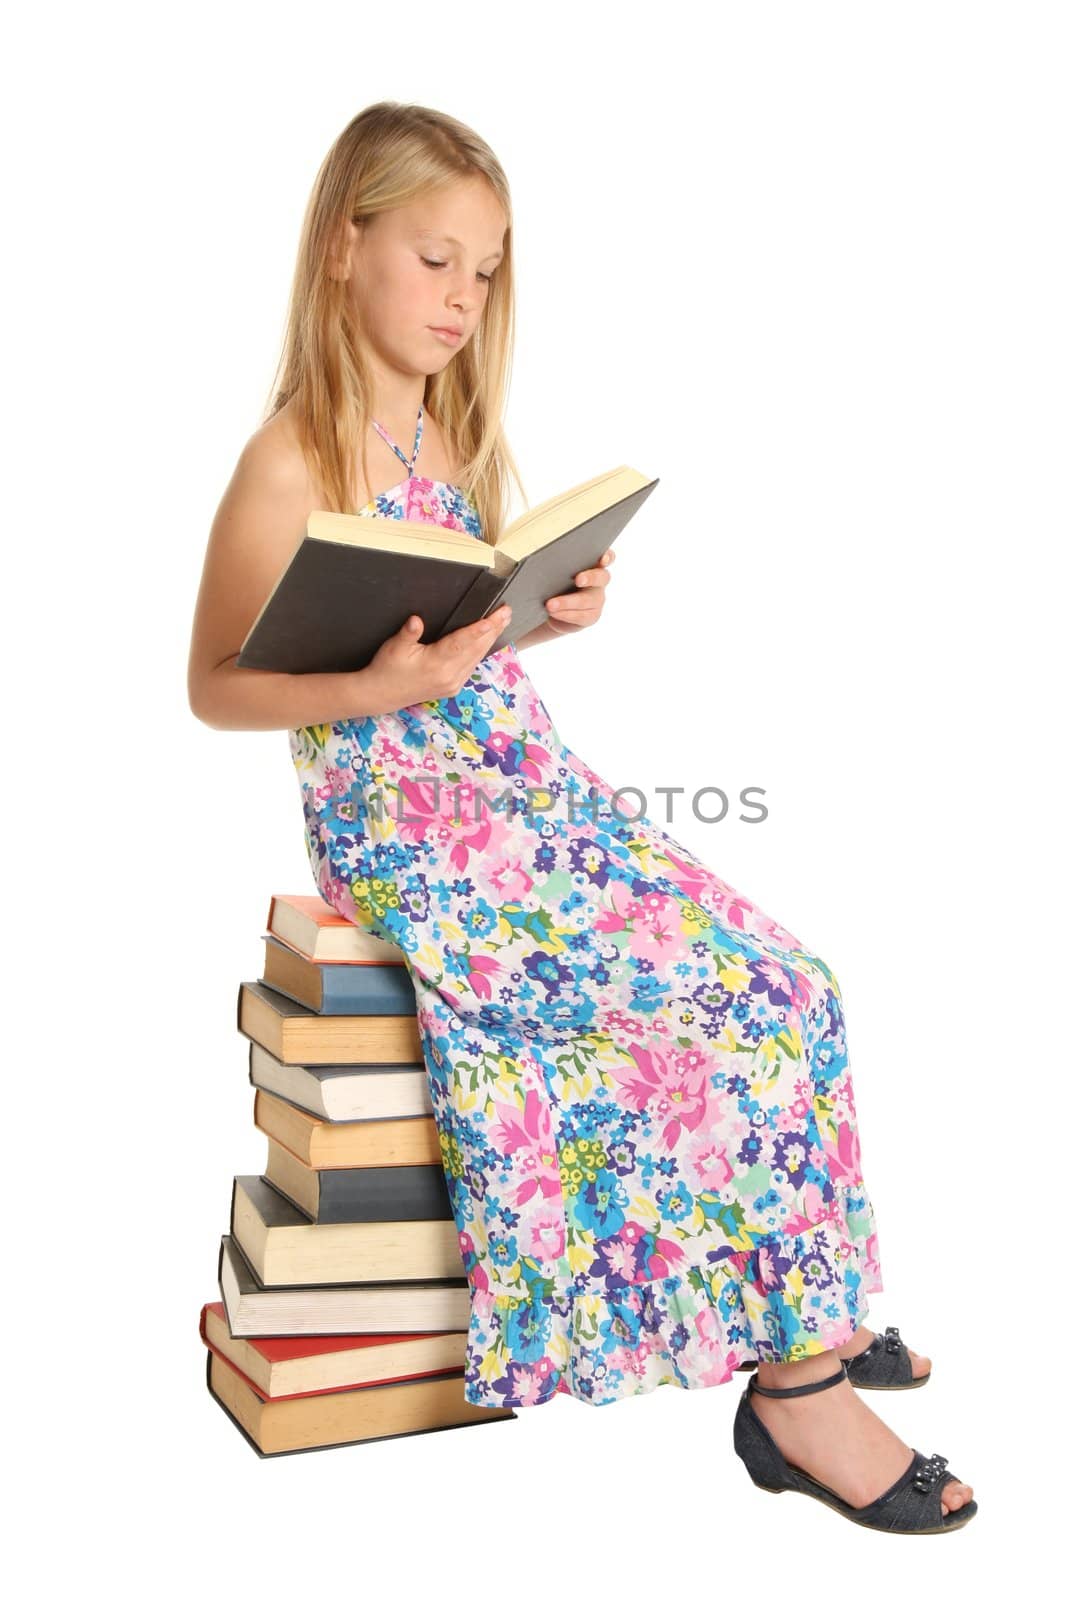 Beautiful young school girl sitting on a pile of books and reading